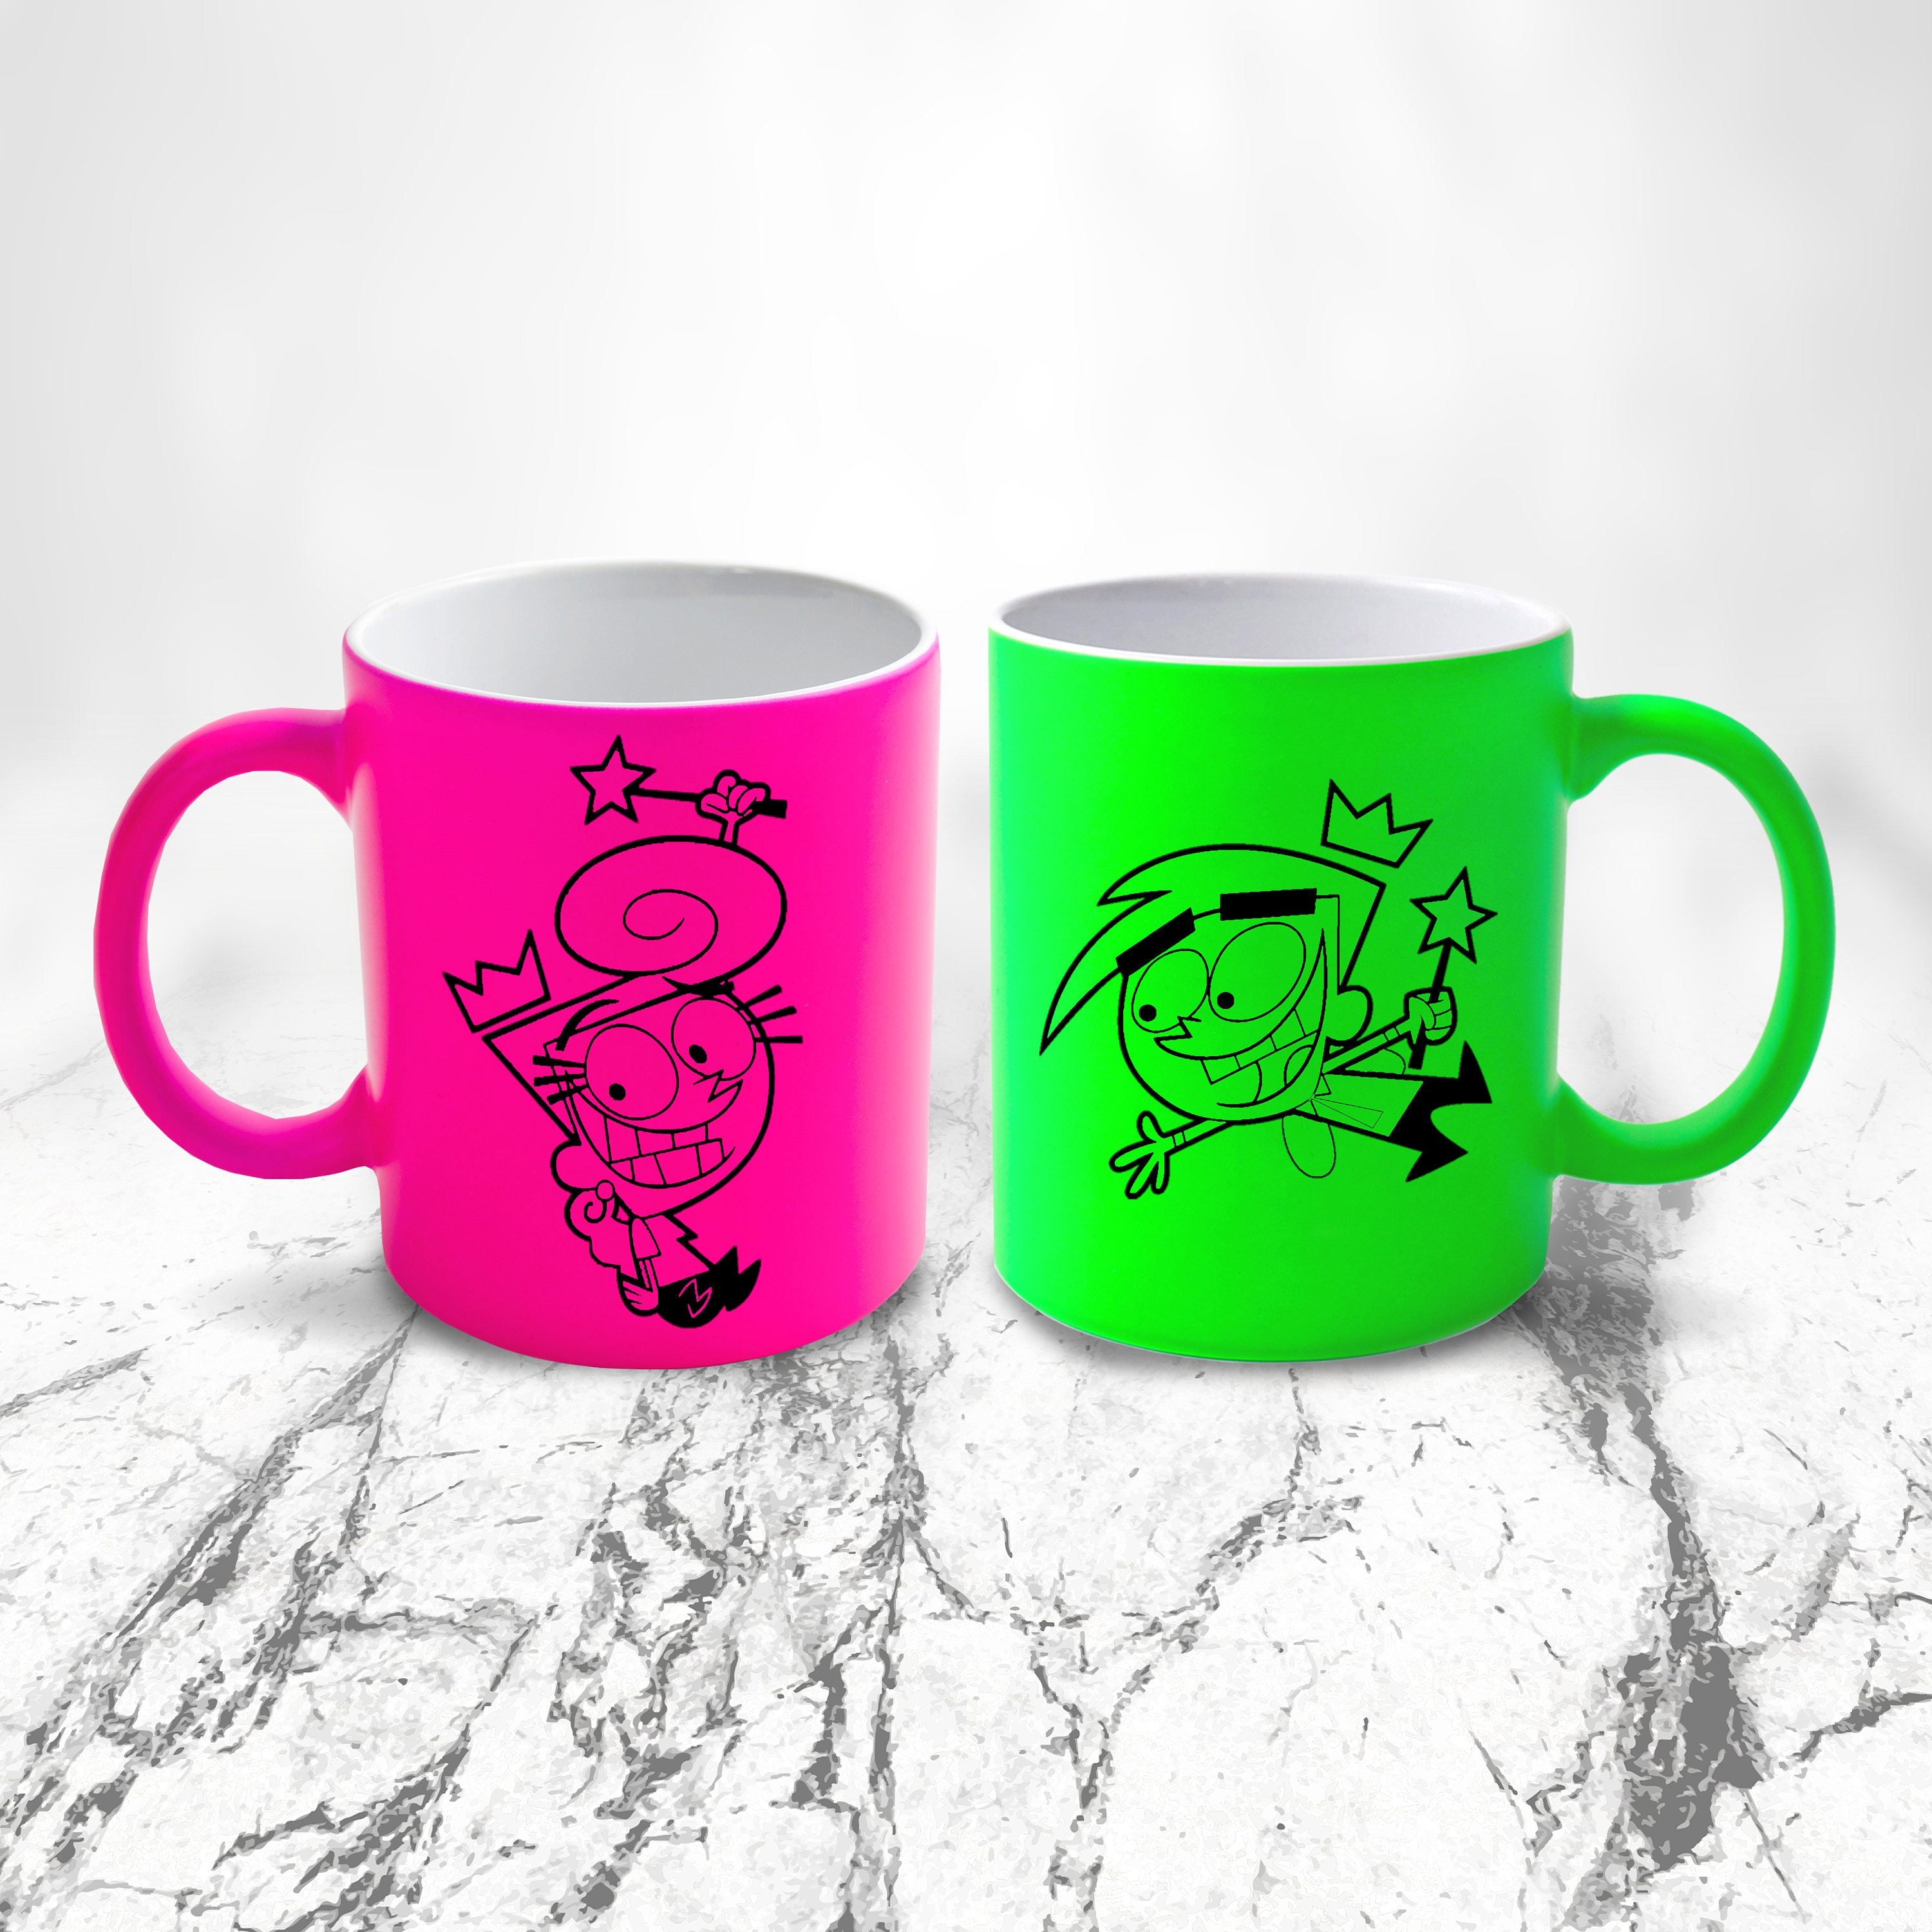 Neon GLUTEN FREE Mug Coffee Tea Cup Funny Novelty Pink Never Together Gift NM09